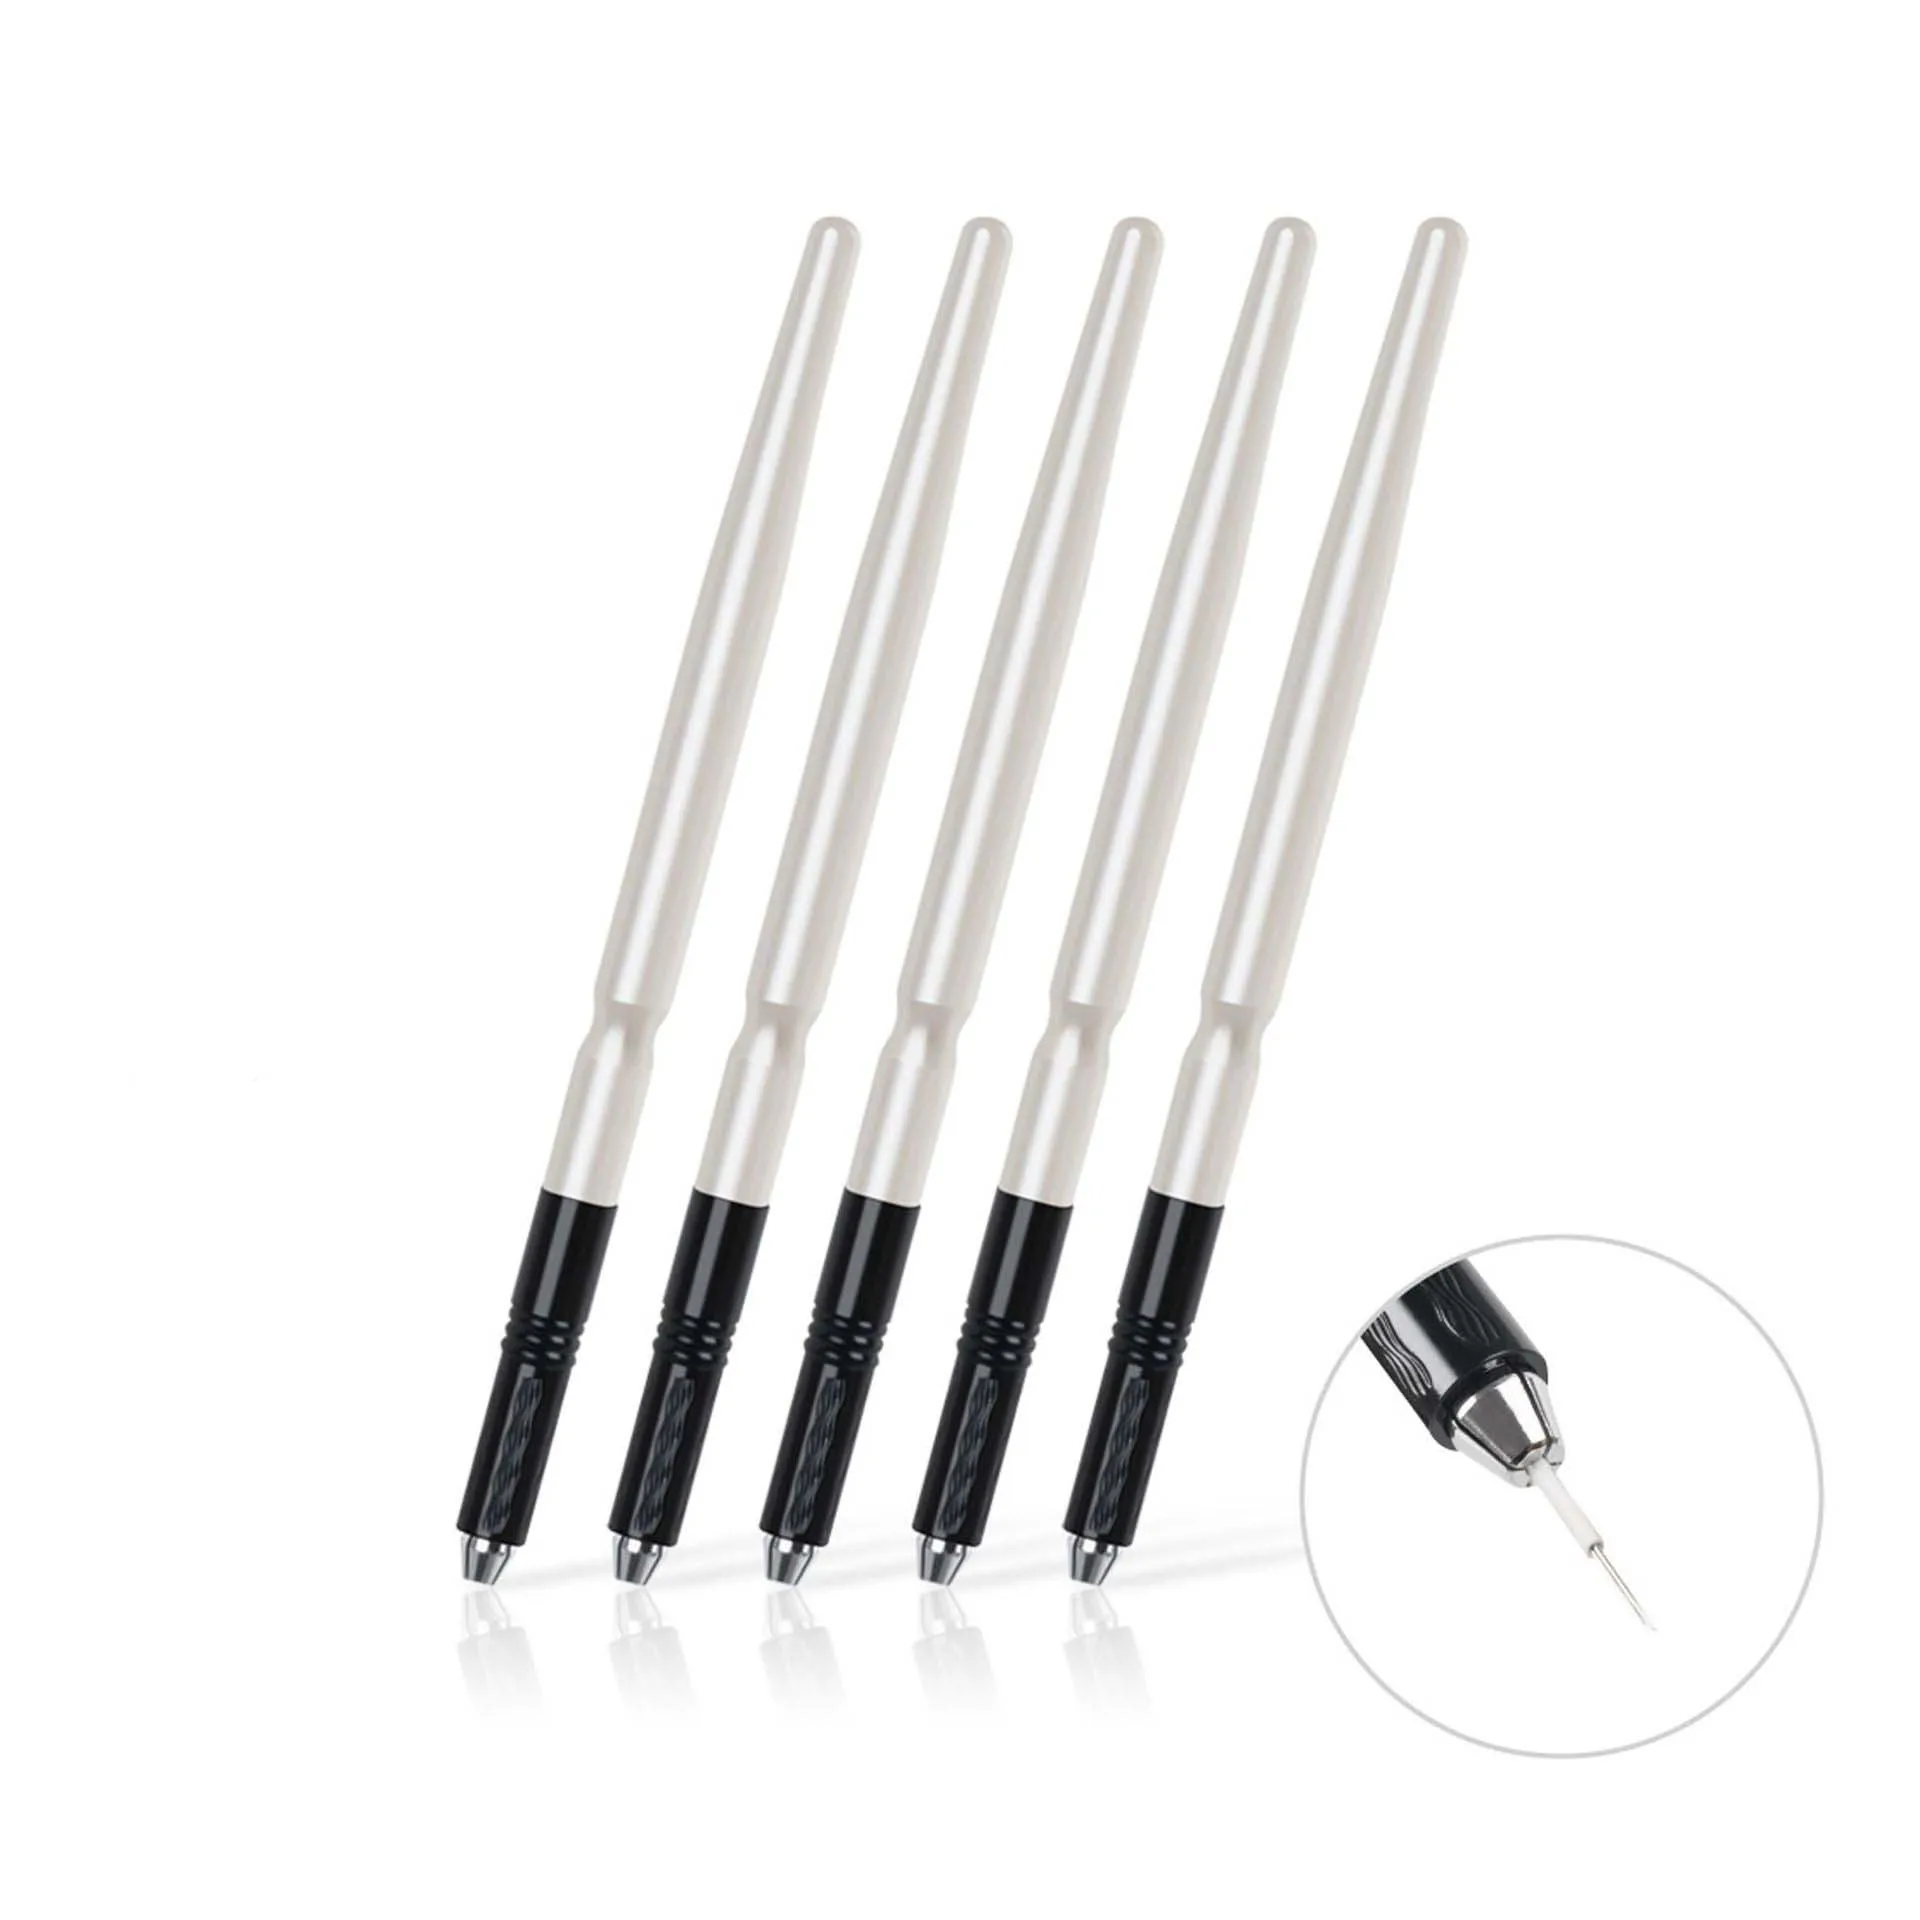 

New Pearl White Light Manual Tattoo Eyebrow Pens For Permanent Makeup Supplies Durable Aluminum Pen With Lock-Pin Tech